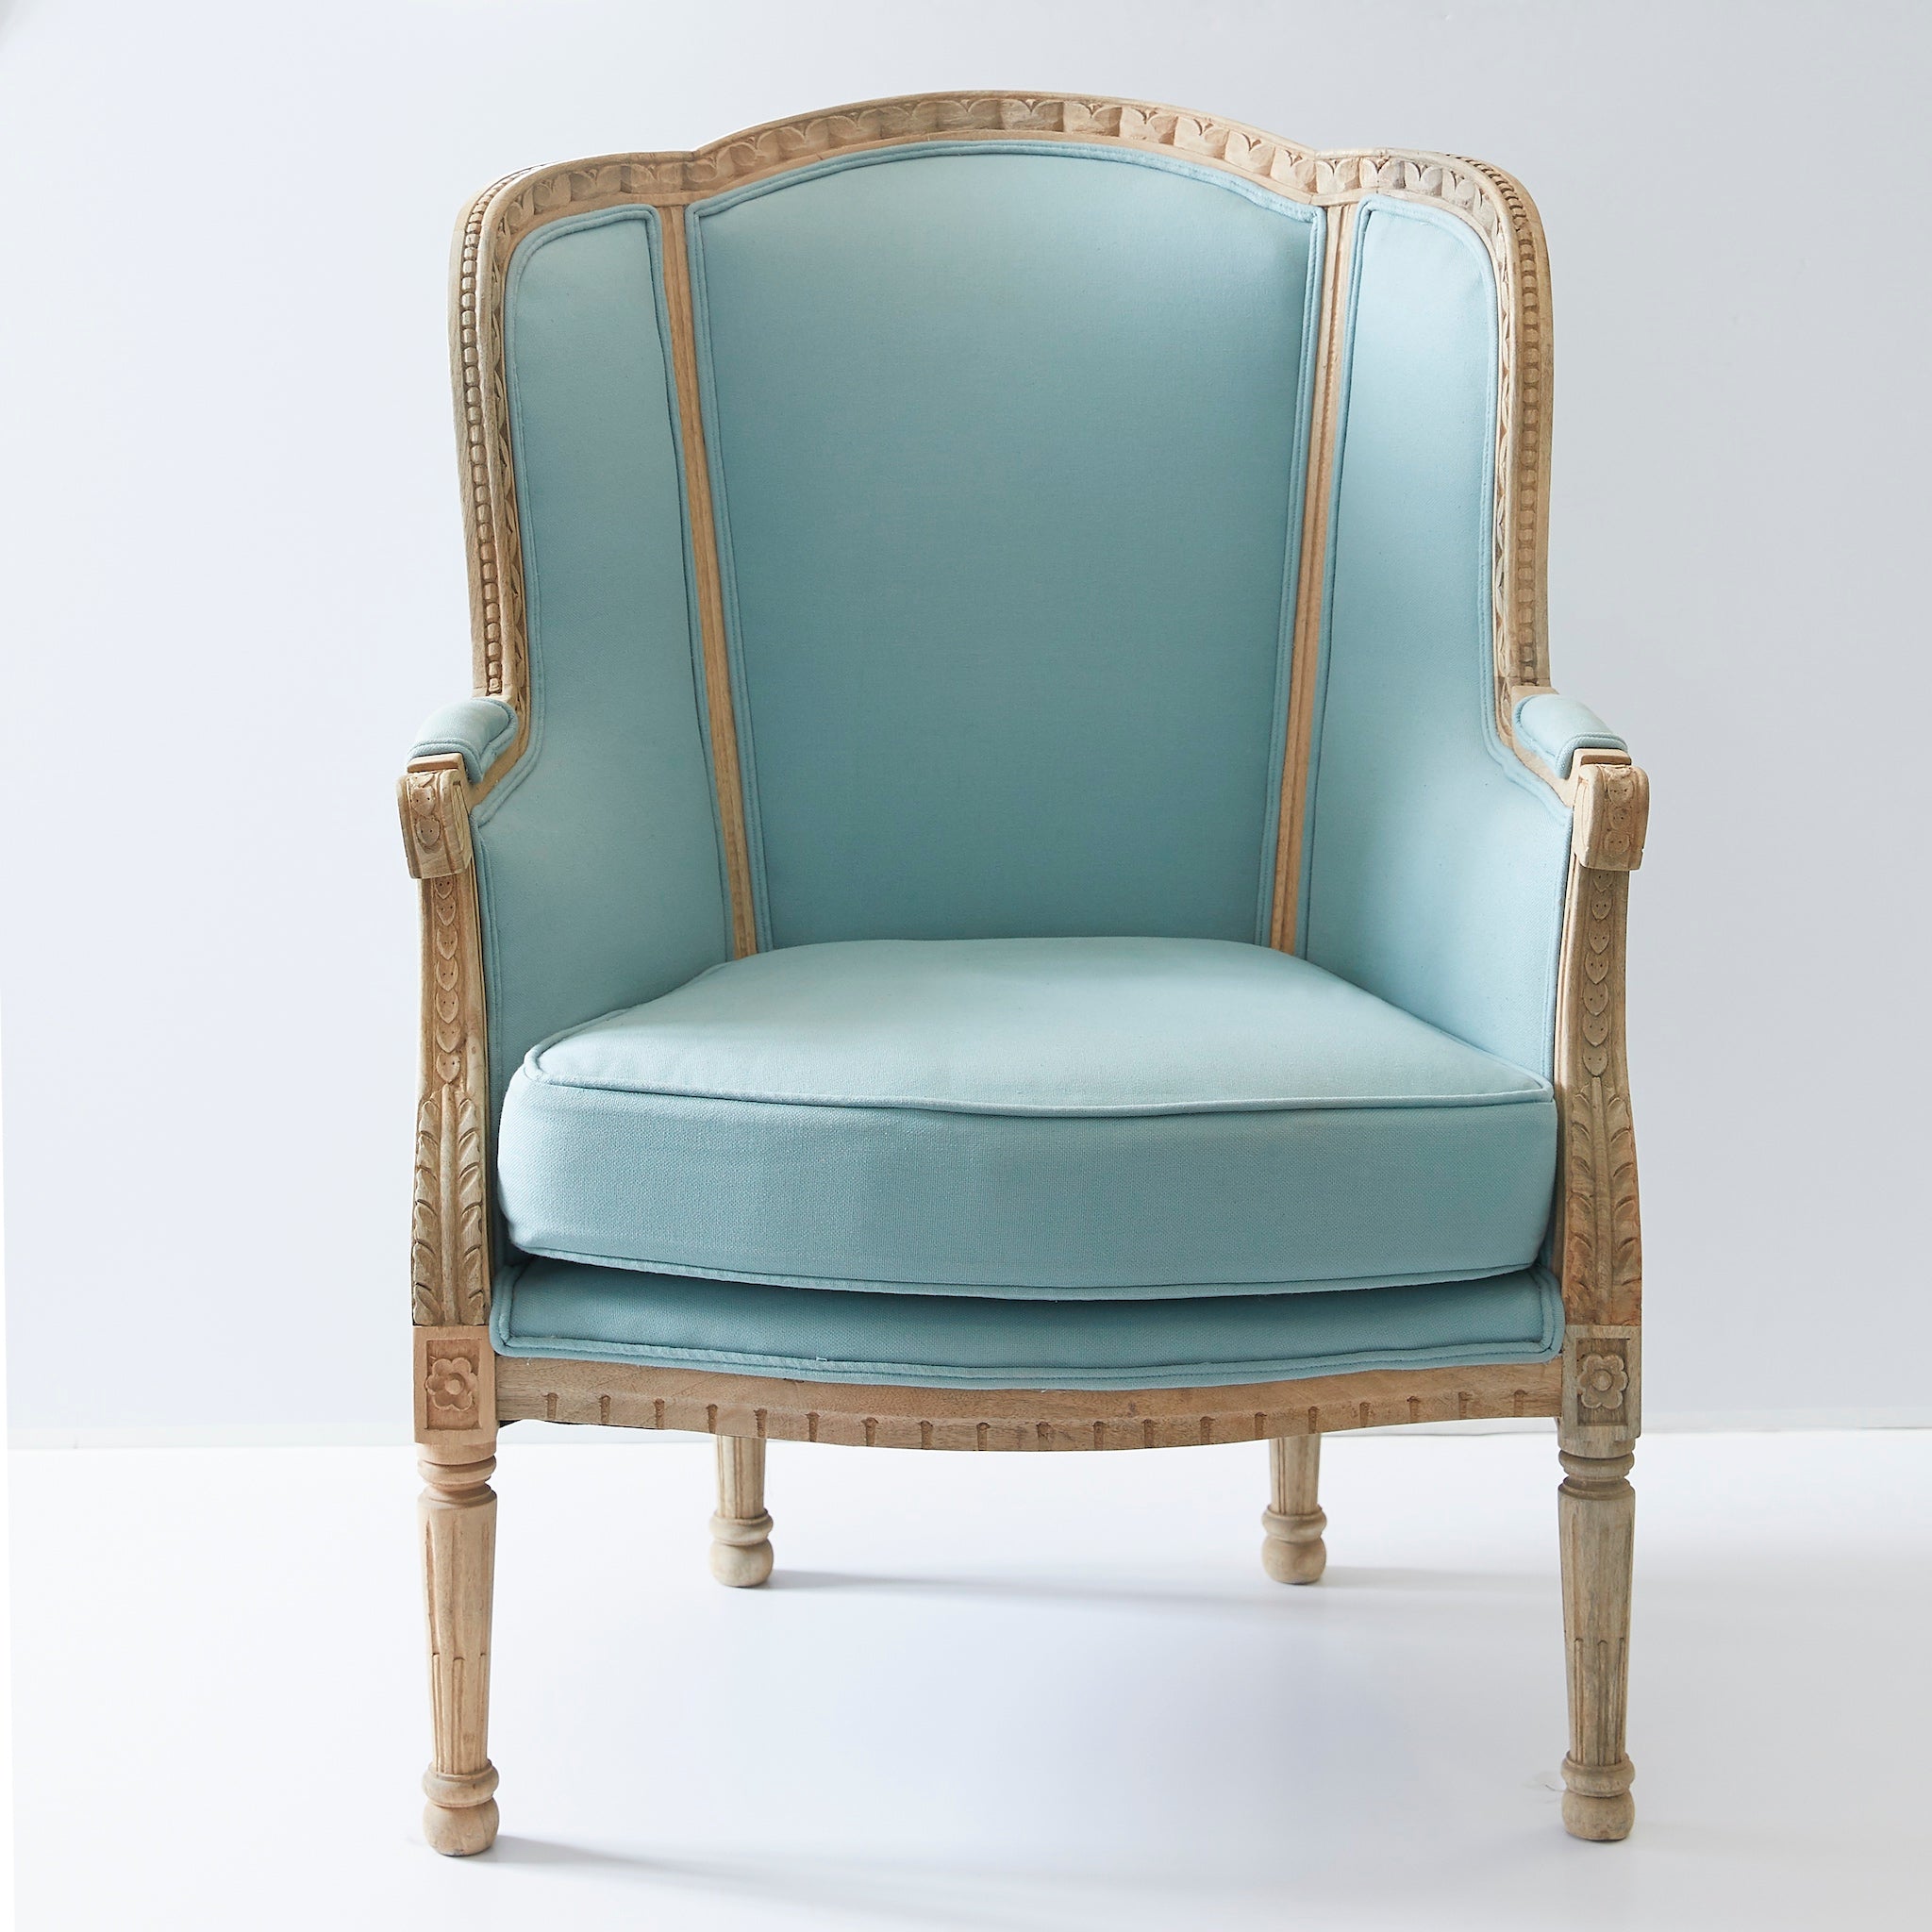 Louis XV Wing Chair with blue upholstery and a wooden frame